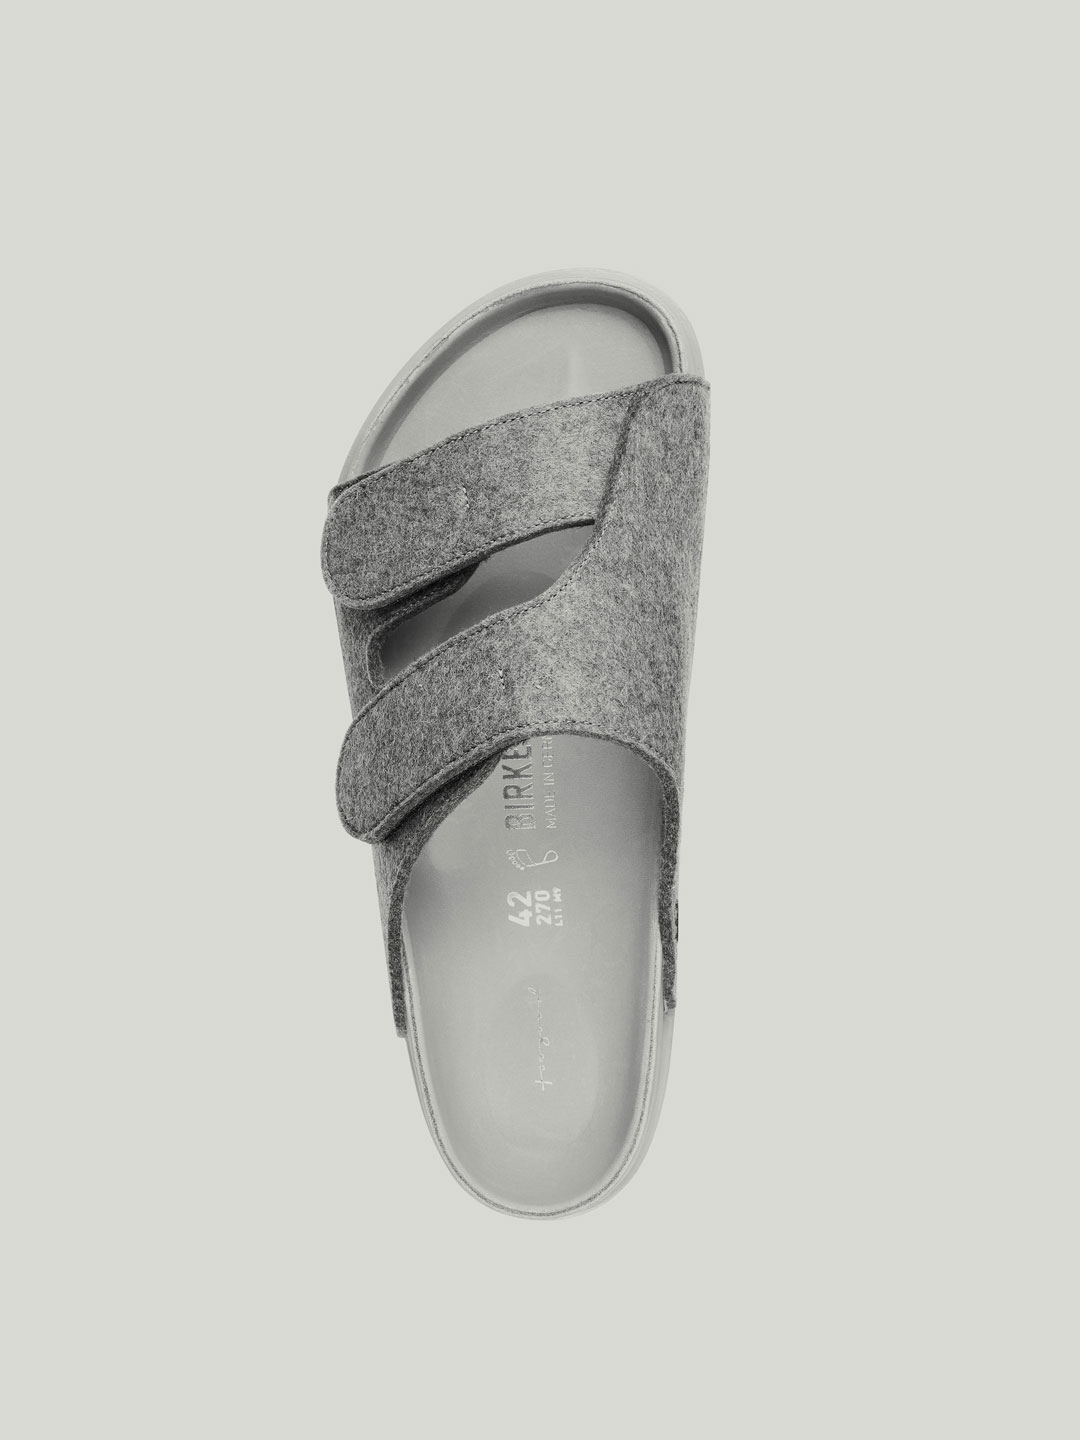 The Forager Premium Flannel Sandals - Grey